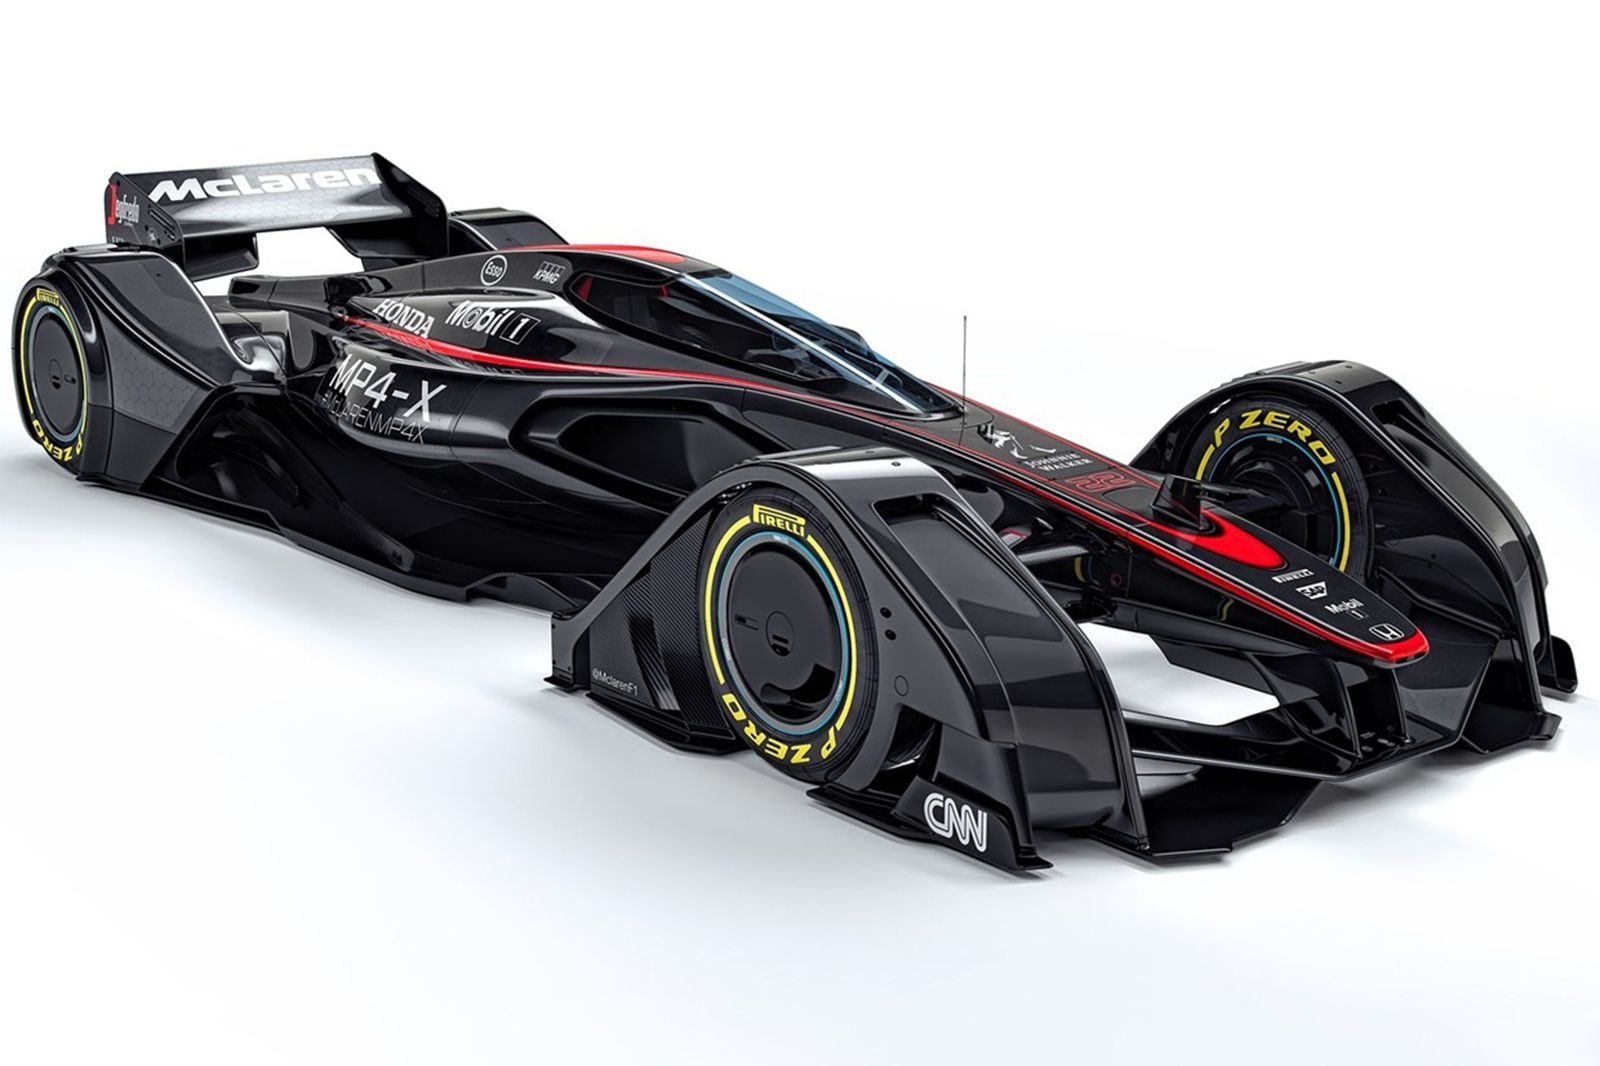 mclaren teases the future of formula 1 cars mp4 x in pictures image 1